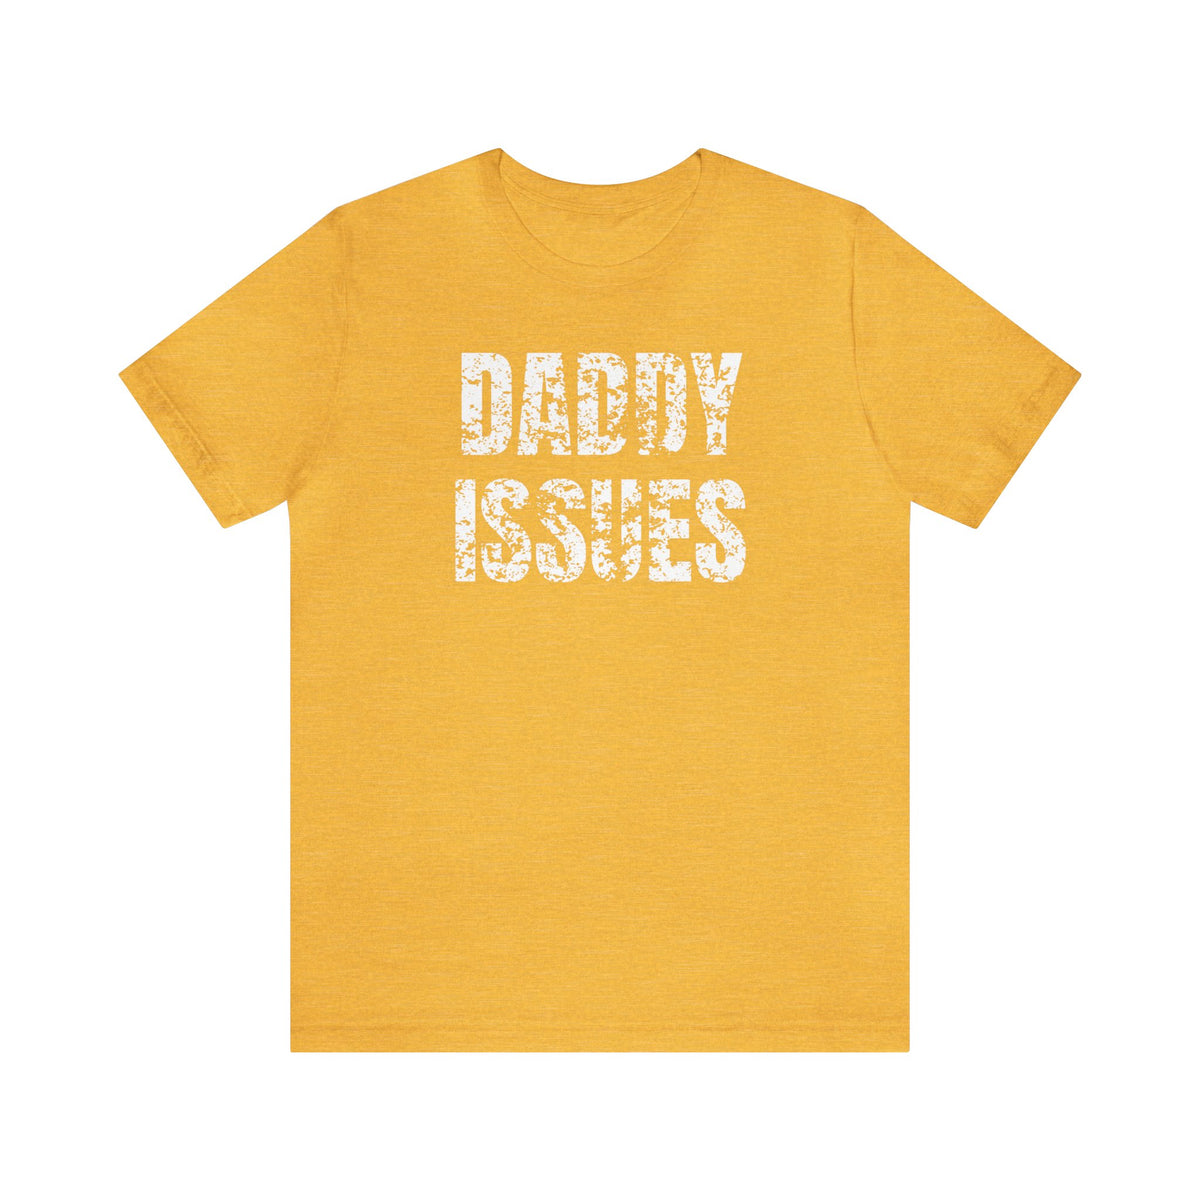 Daddy Issues Block Tee - Tee - Twisted Jezebel